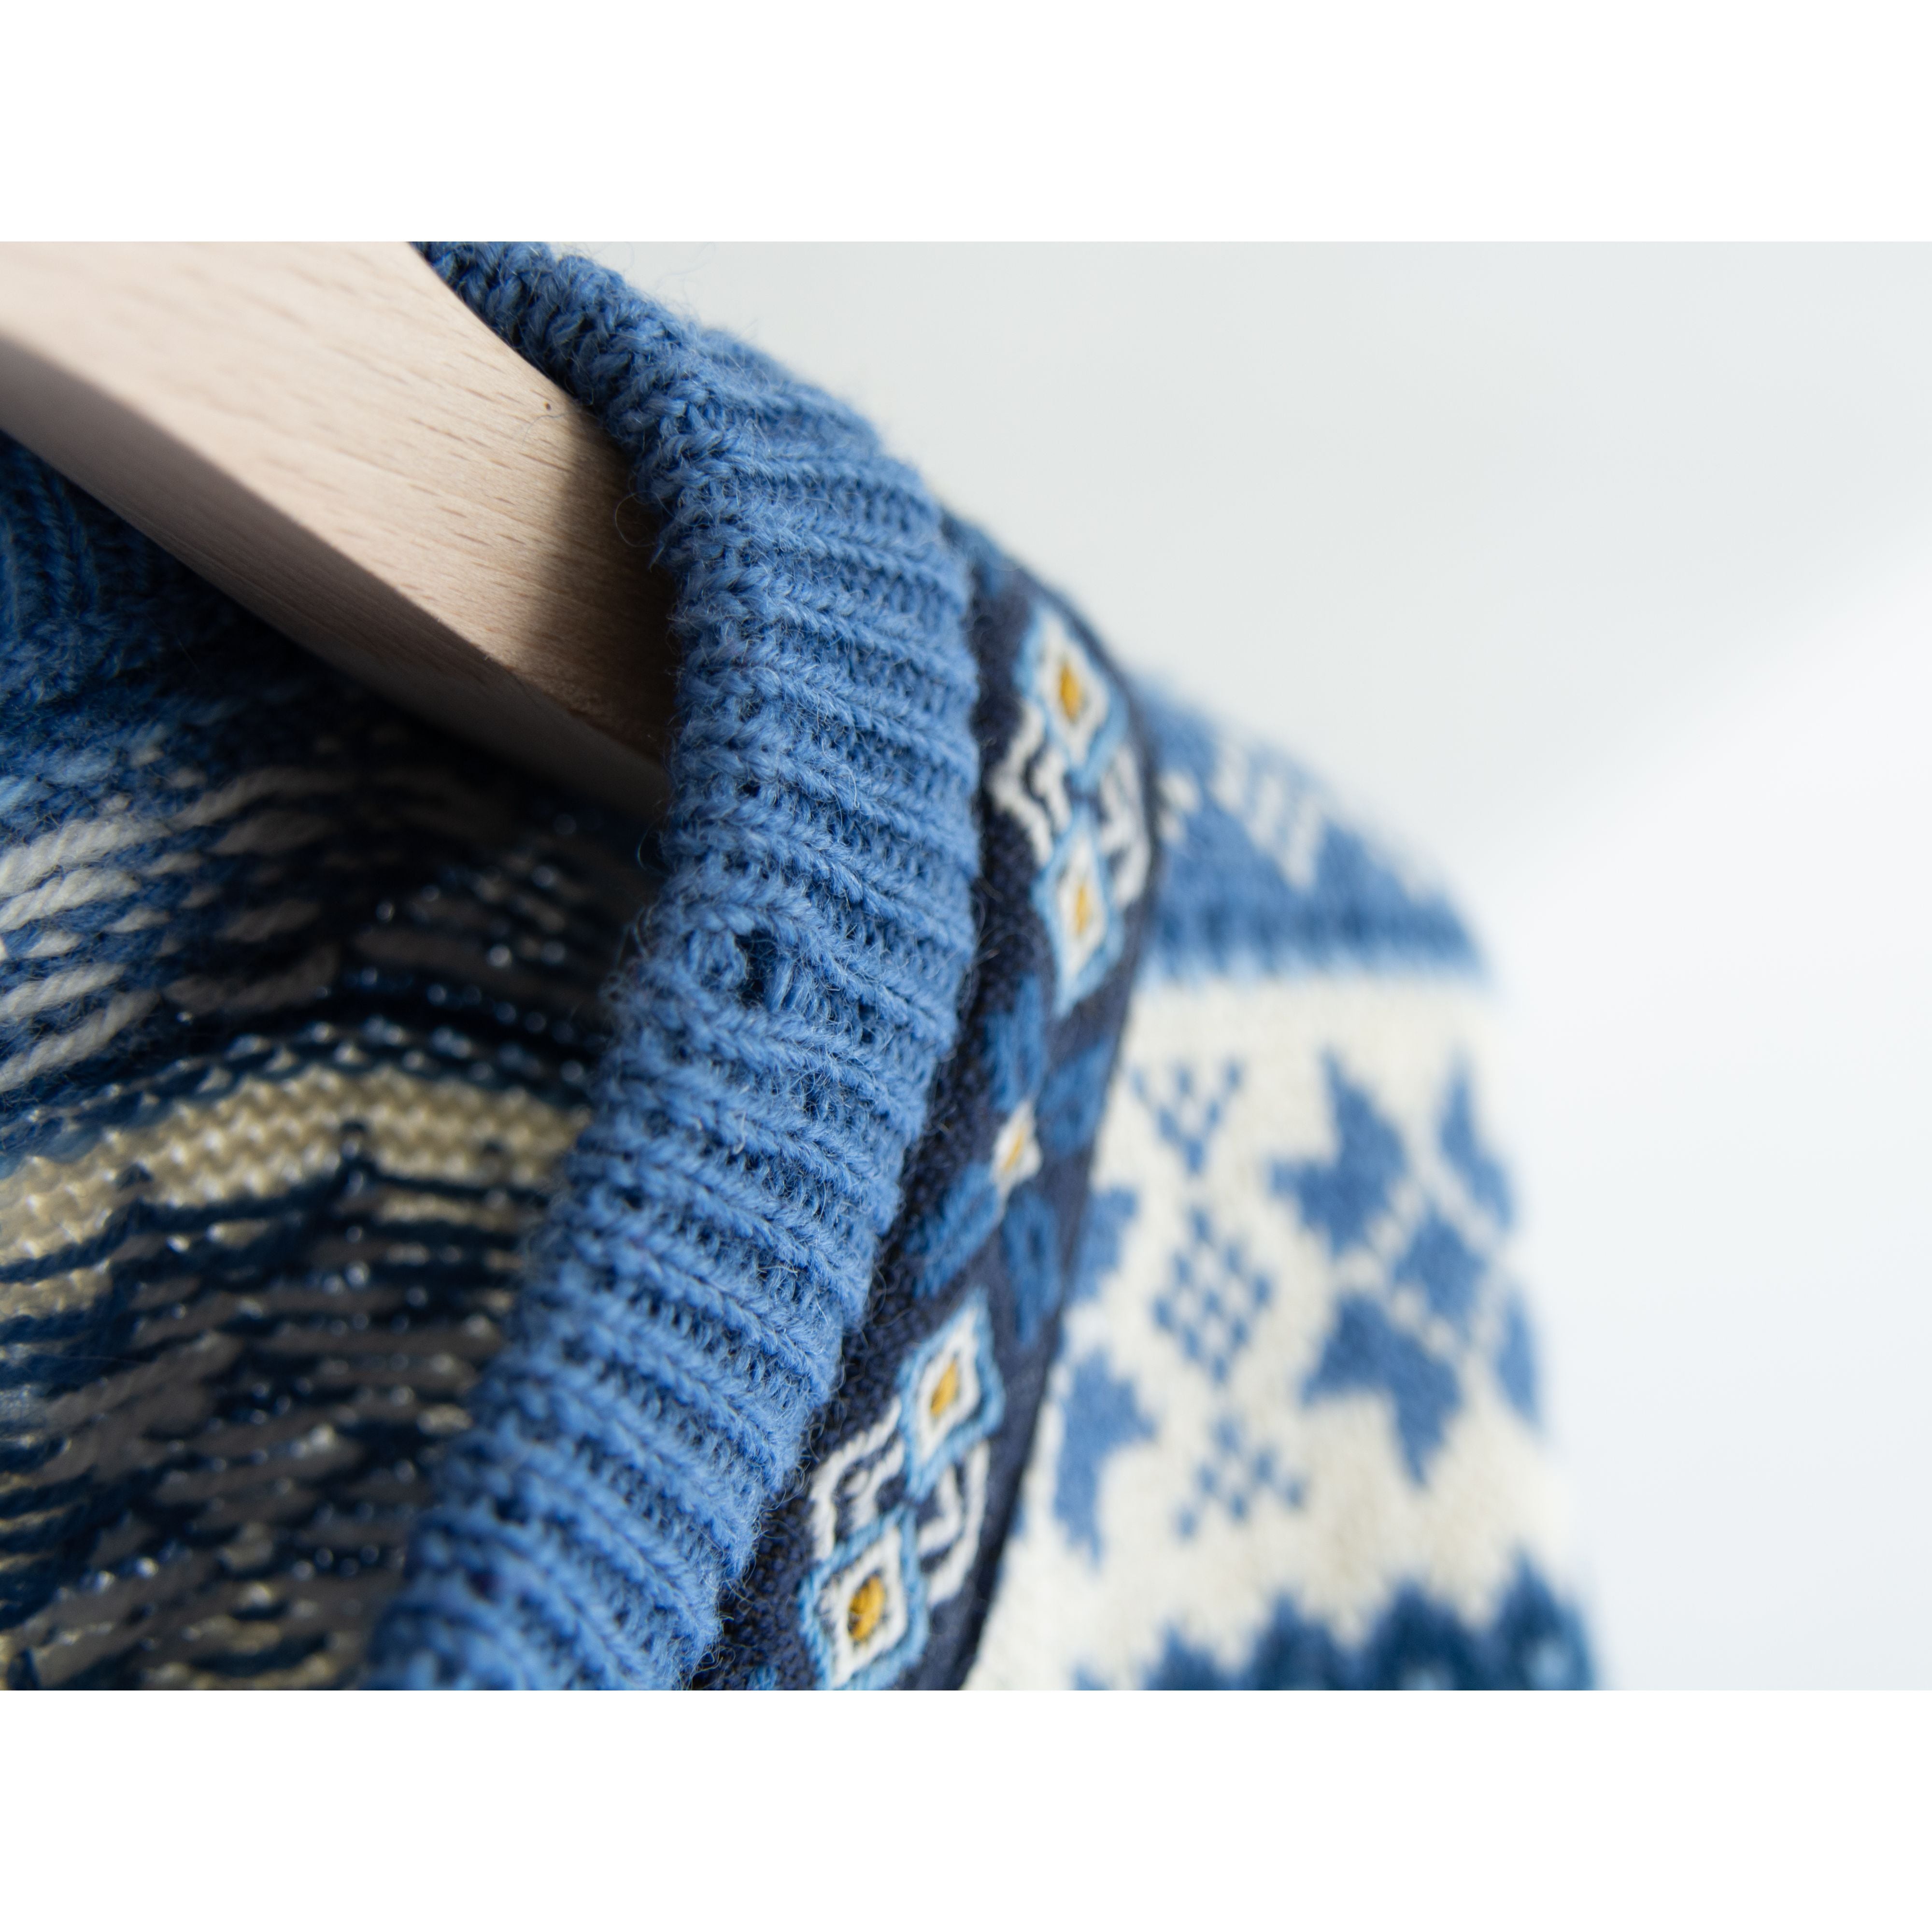 FJORD】Made in Norway Nordic knit wool cardigan sweater